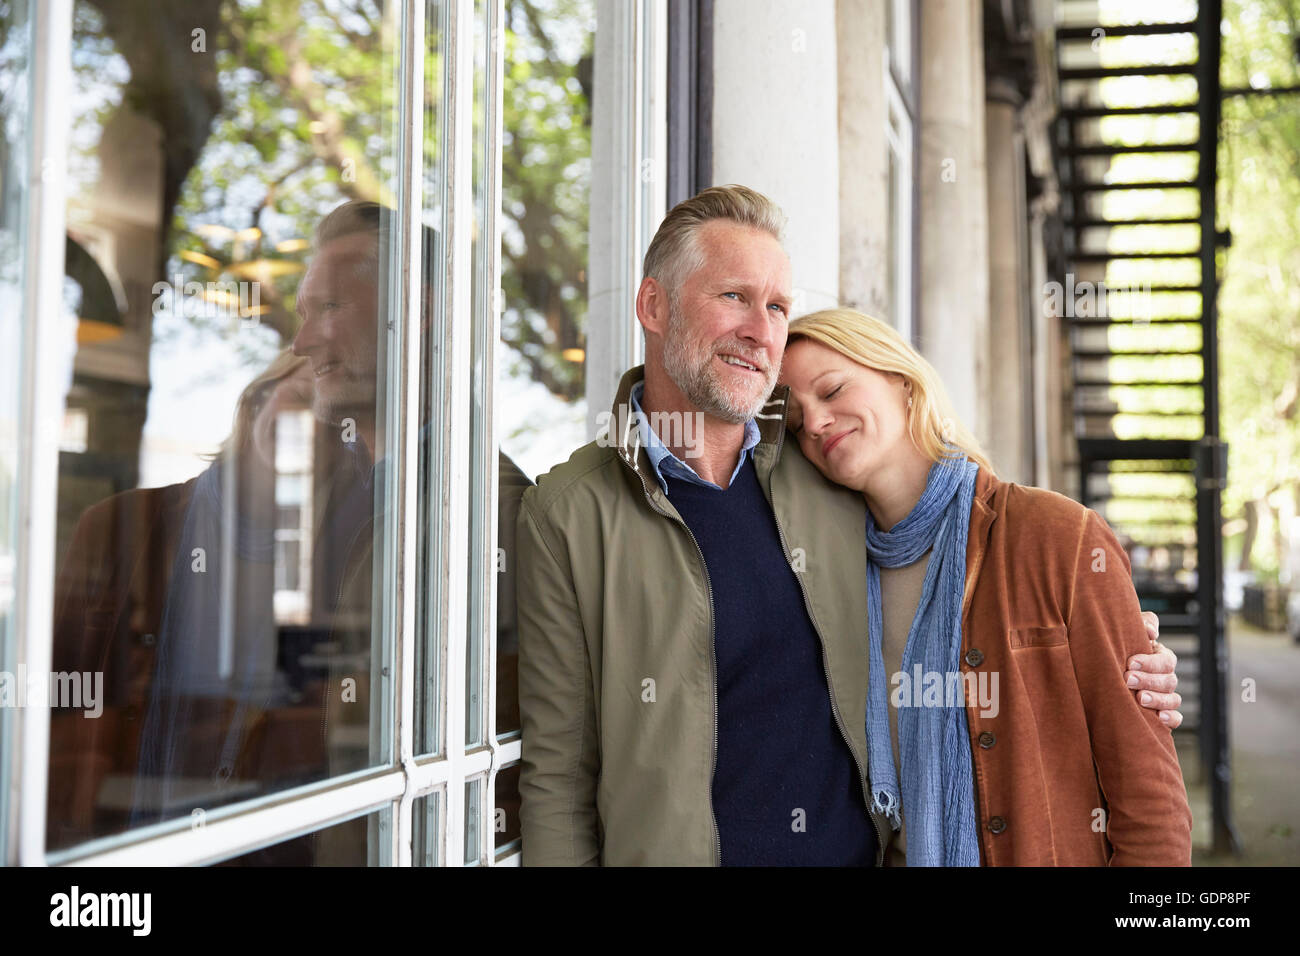 Mature couple leaning against window smiling Banque D'Images